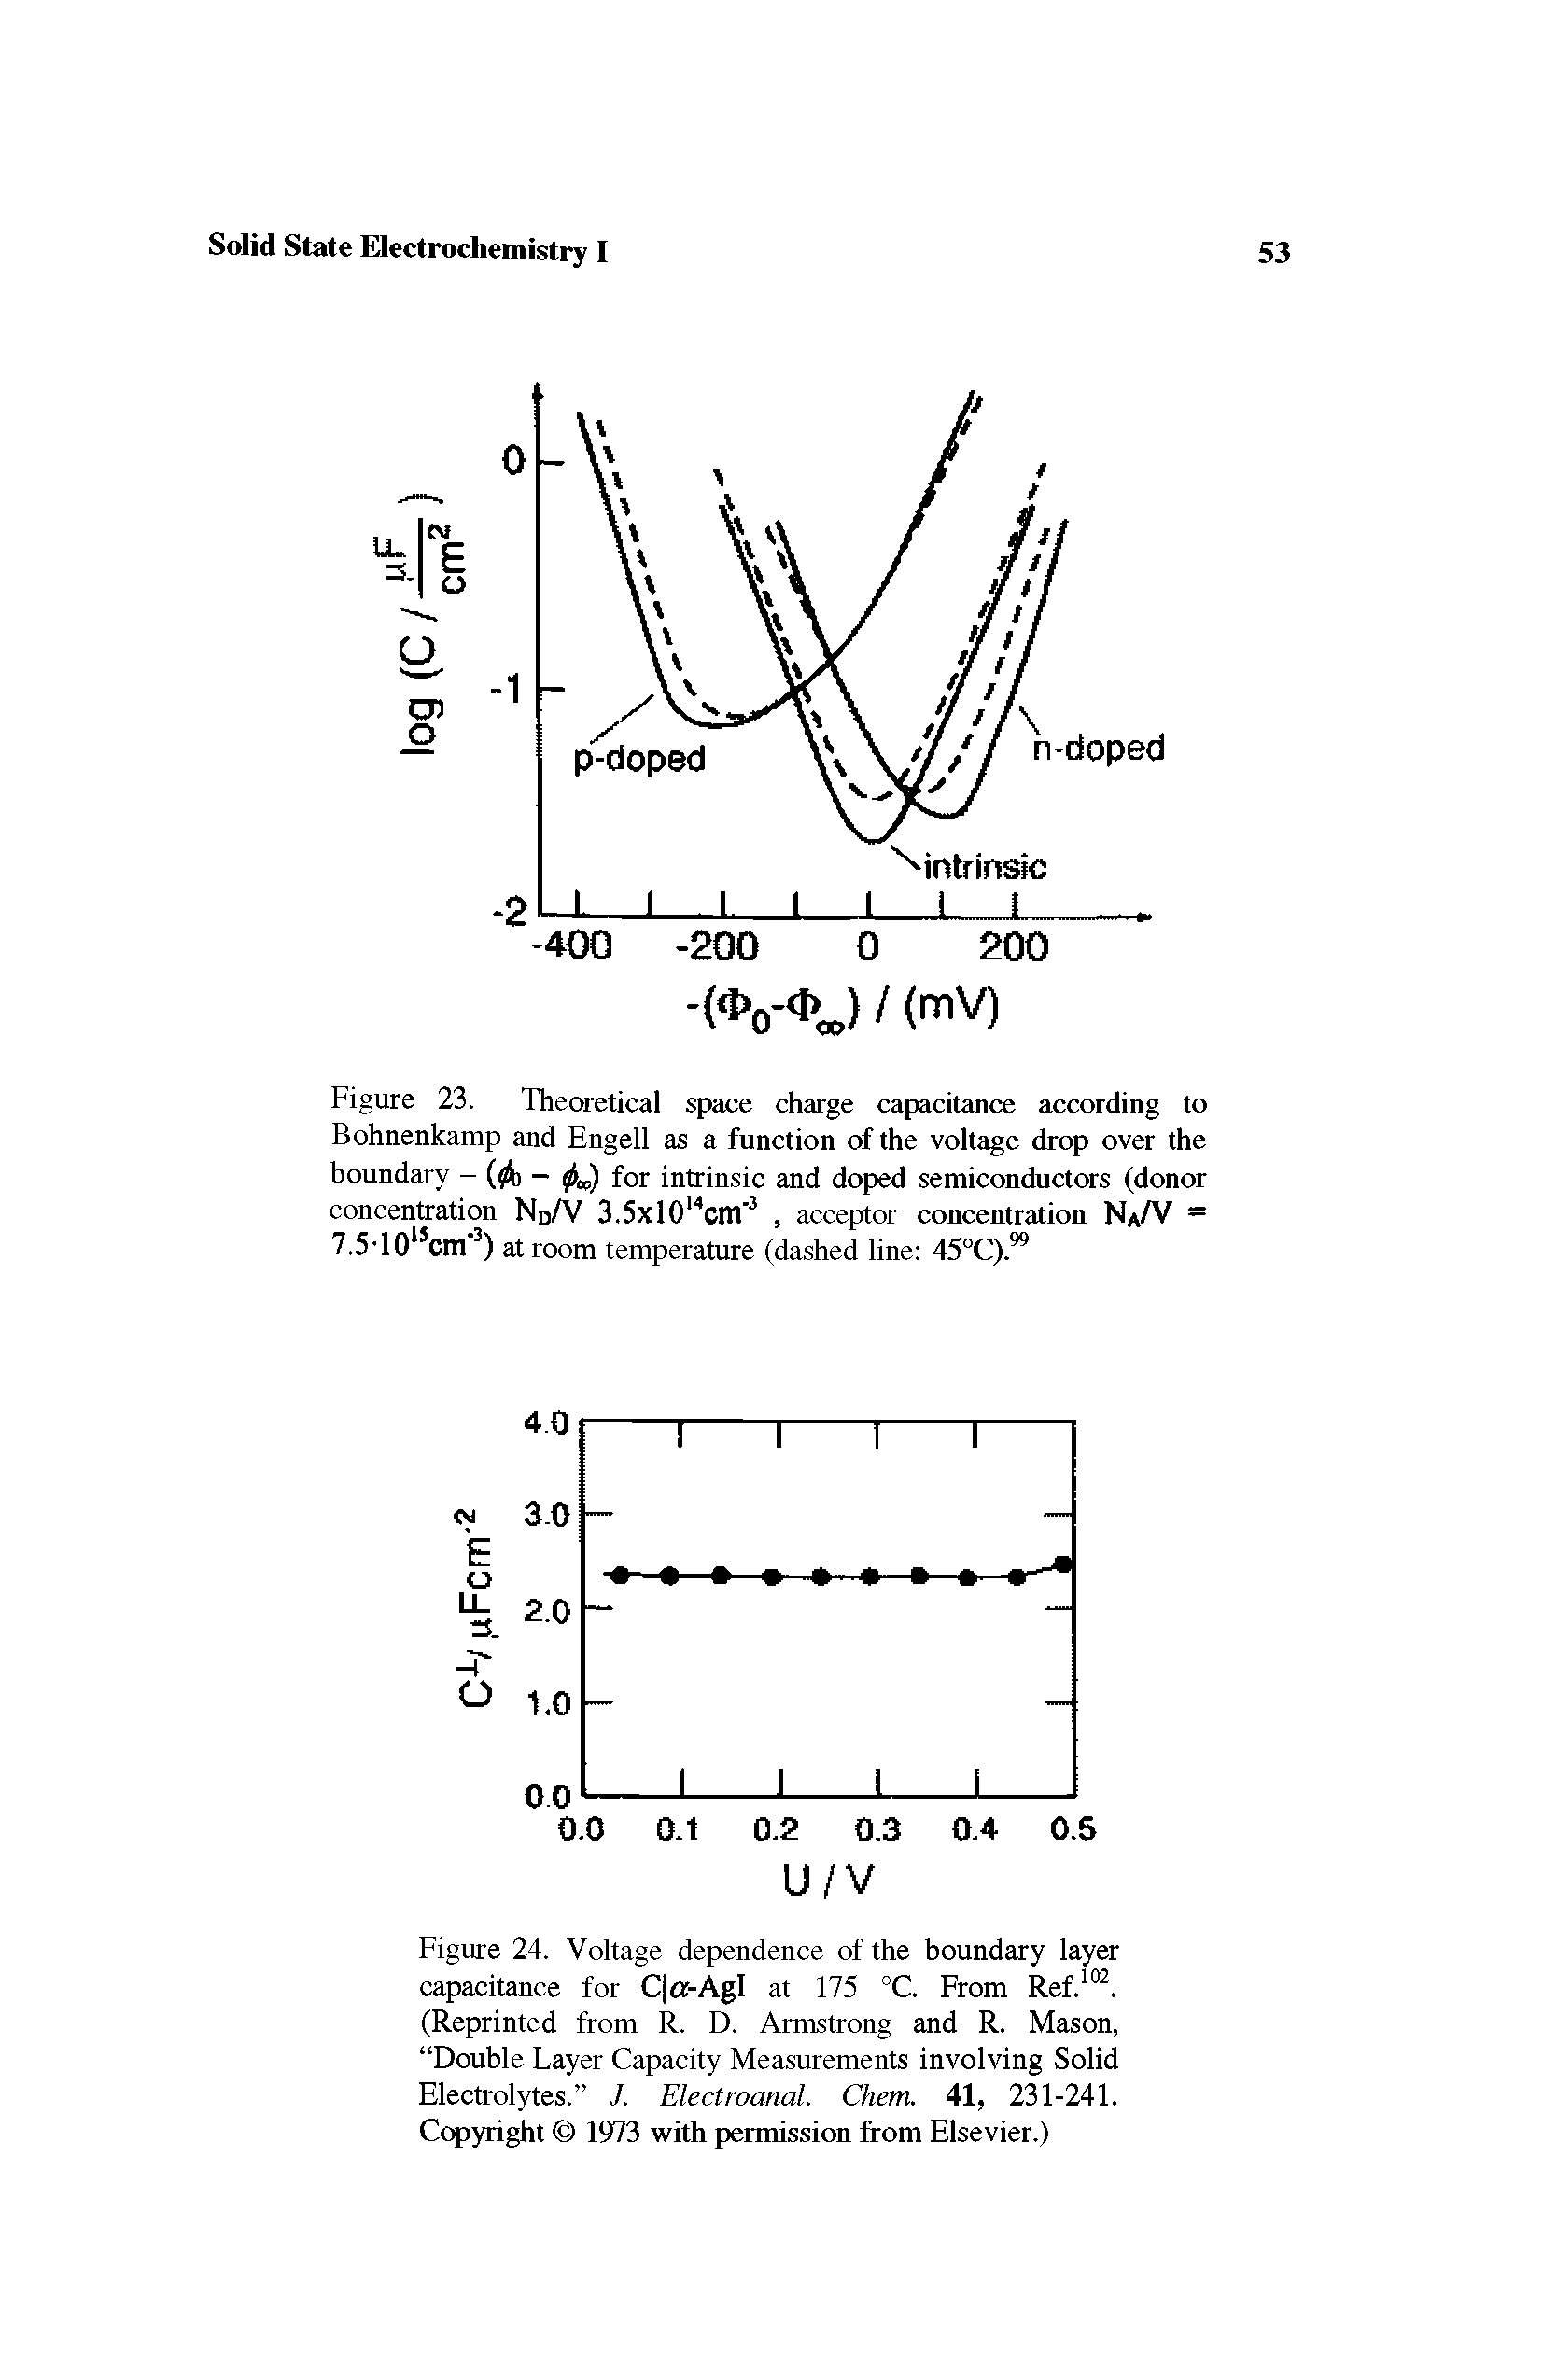 Figure 23. Theoretical space charge capacitance according to Bohnenkamp and Engell as a function of the voltage drop over the boundary - ( i - for intrinsic and doped semiconductors (donor...